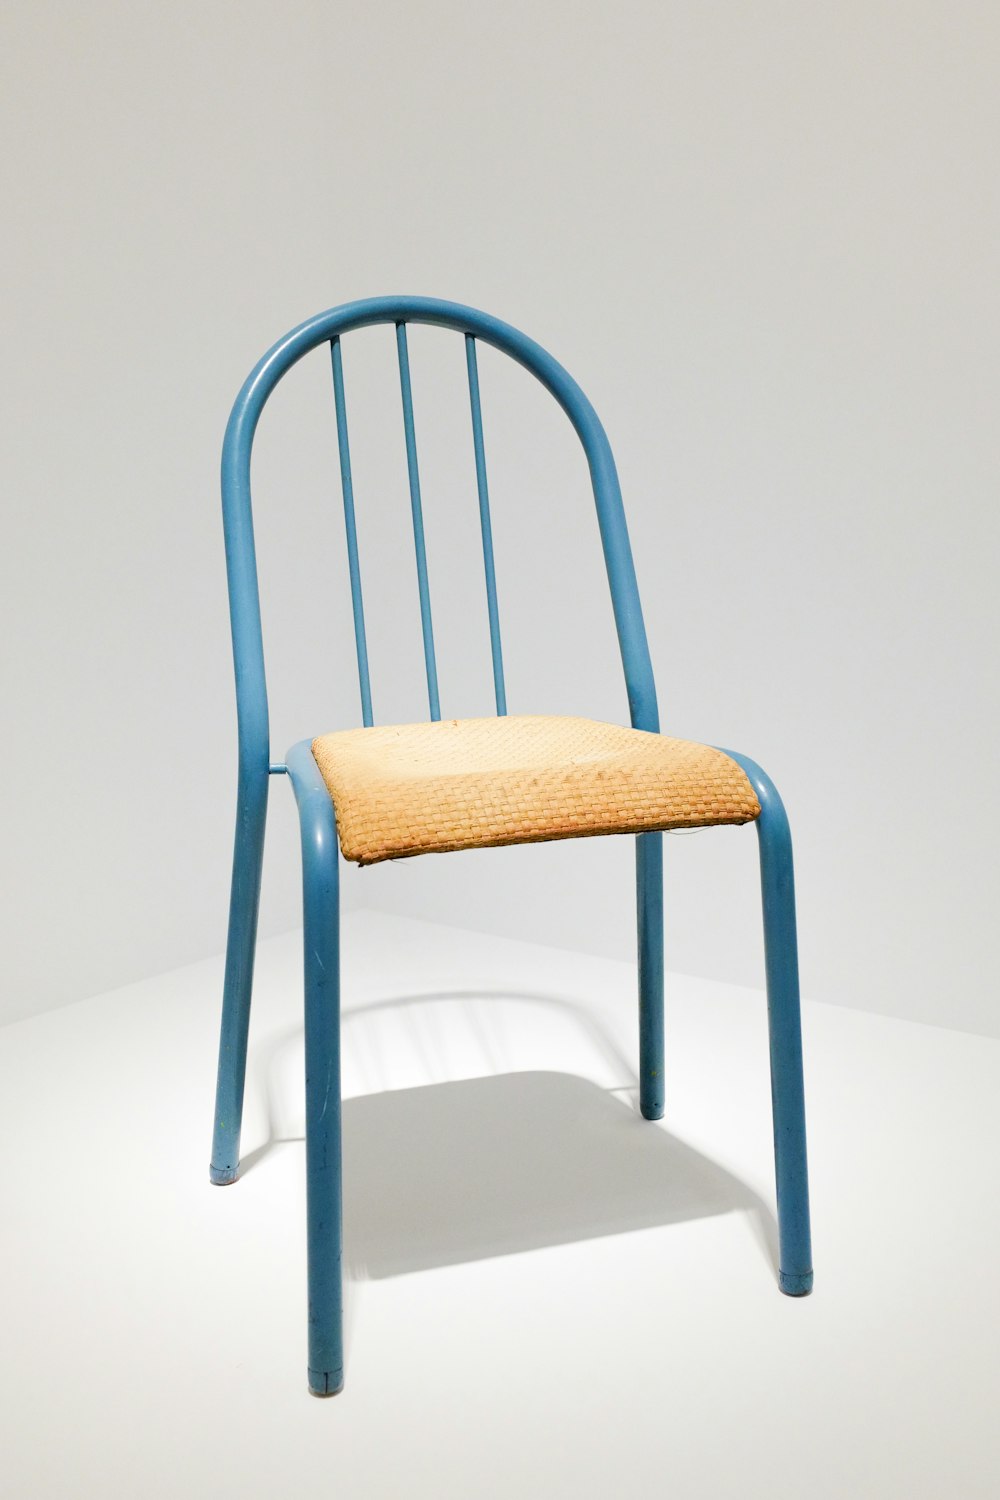 a blue chair with a woven seat pad